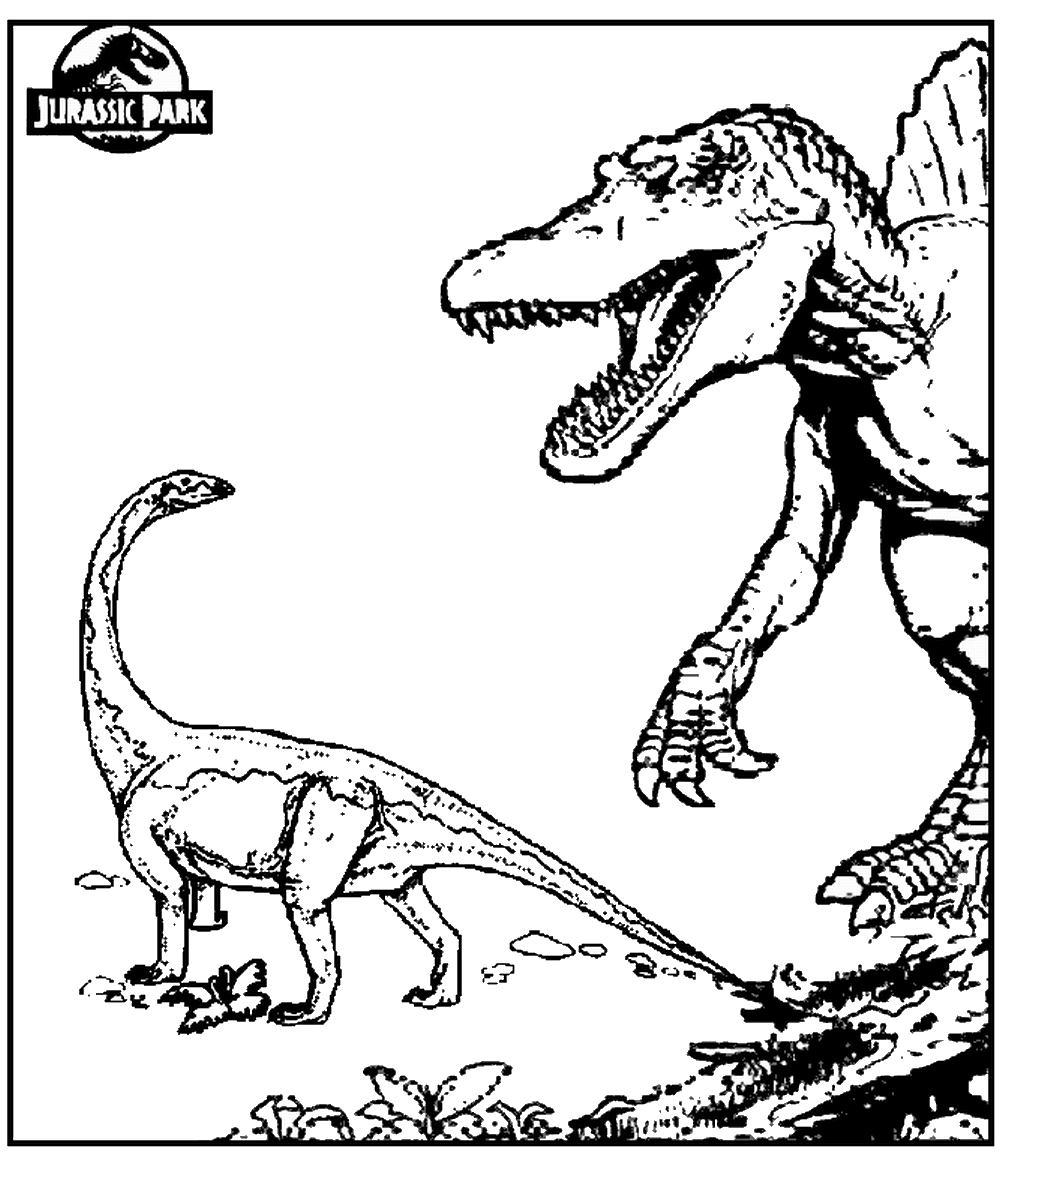 Jurassic Park 3 Coloring Pages At Free Printable Colorings Pages To Print And 